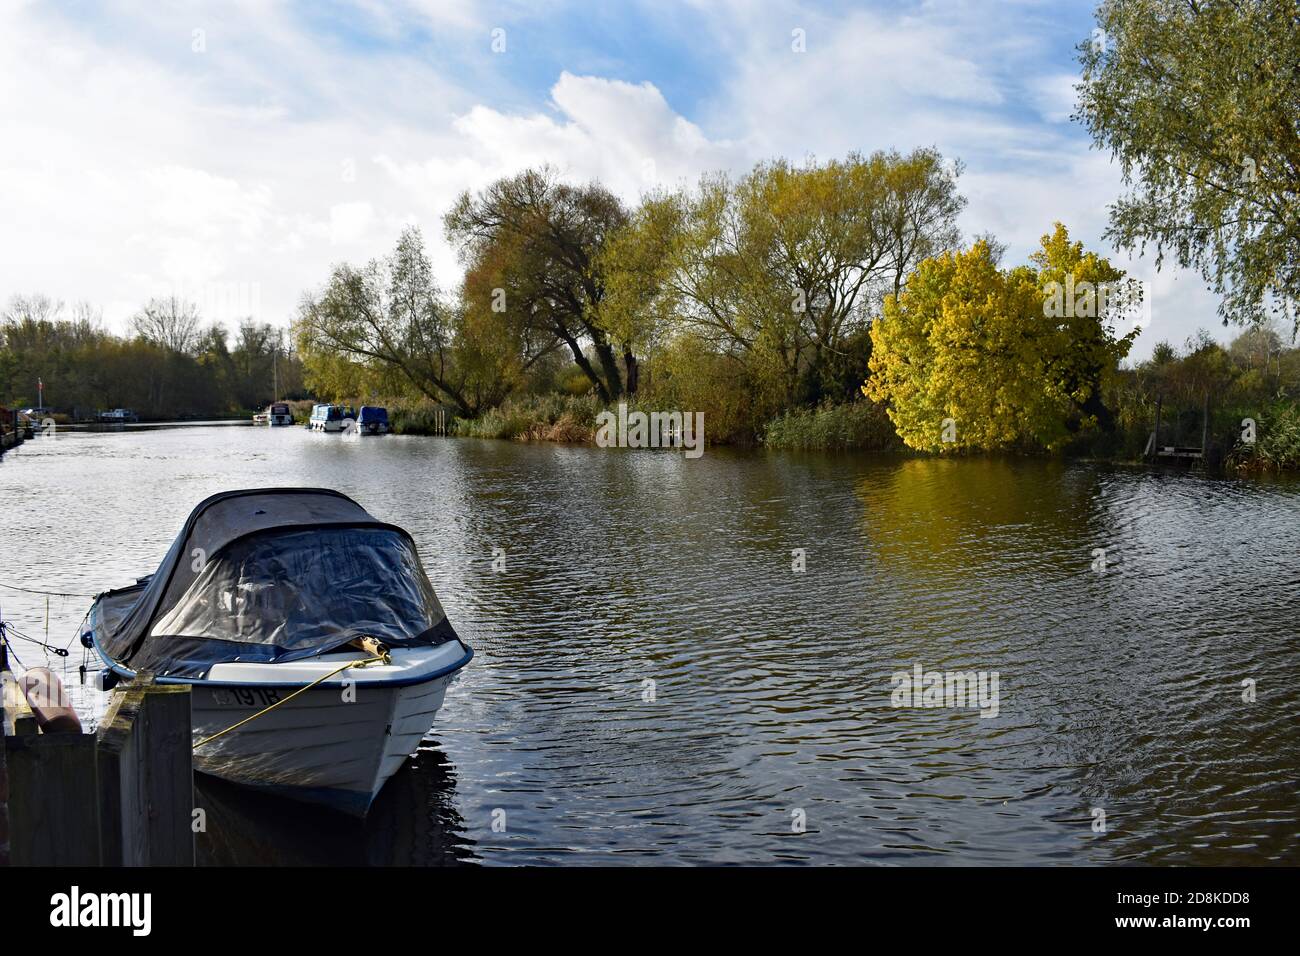 The River Waveney as it turns a bend  by the tow of Beccles in The Broads National Park, England.   Small pleasure boats are moored along the river. Stock Photo